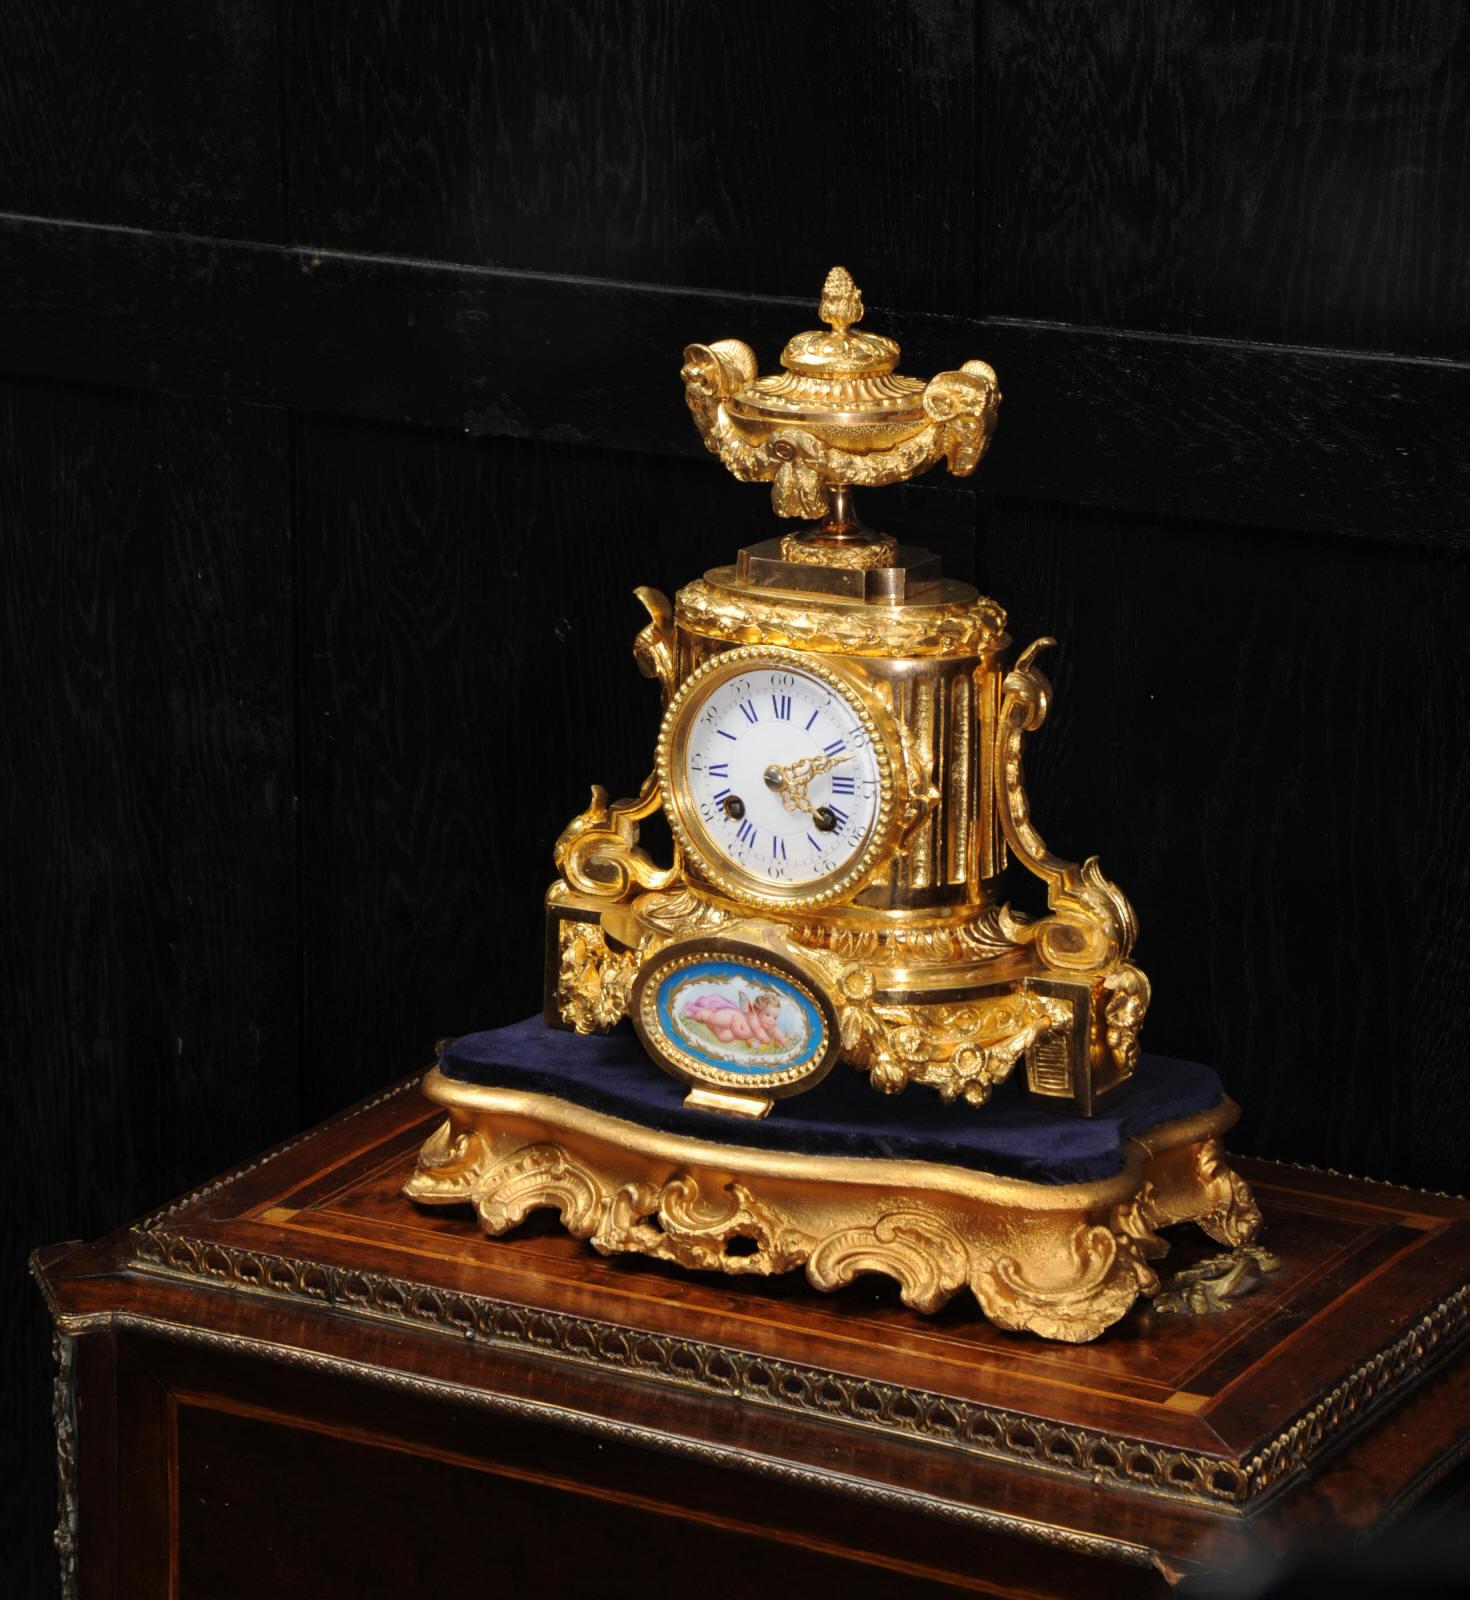 A lovely ormolu boudoir clock, antique French dating from circa 1860. It features a charming porcelain panel, delicately painted with a cherub in the manner of Sèvres. It is classical in style with scrolls and a large urn with rams head handles to